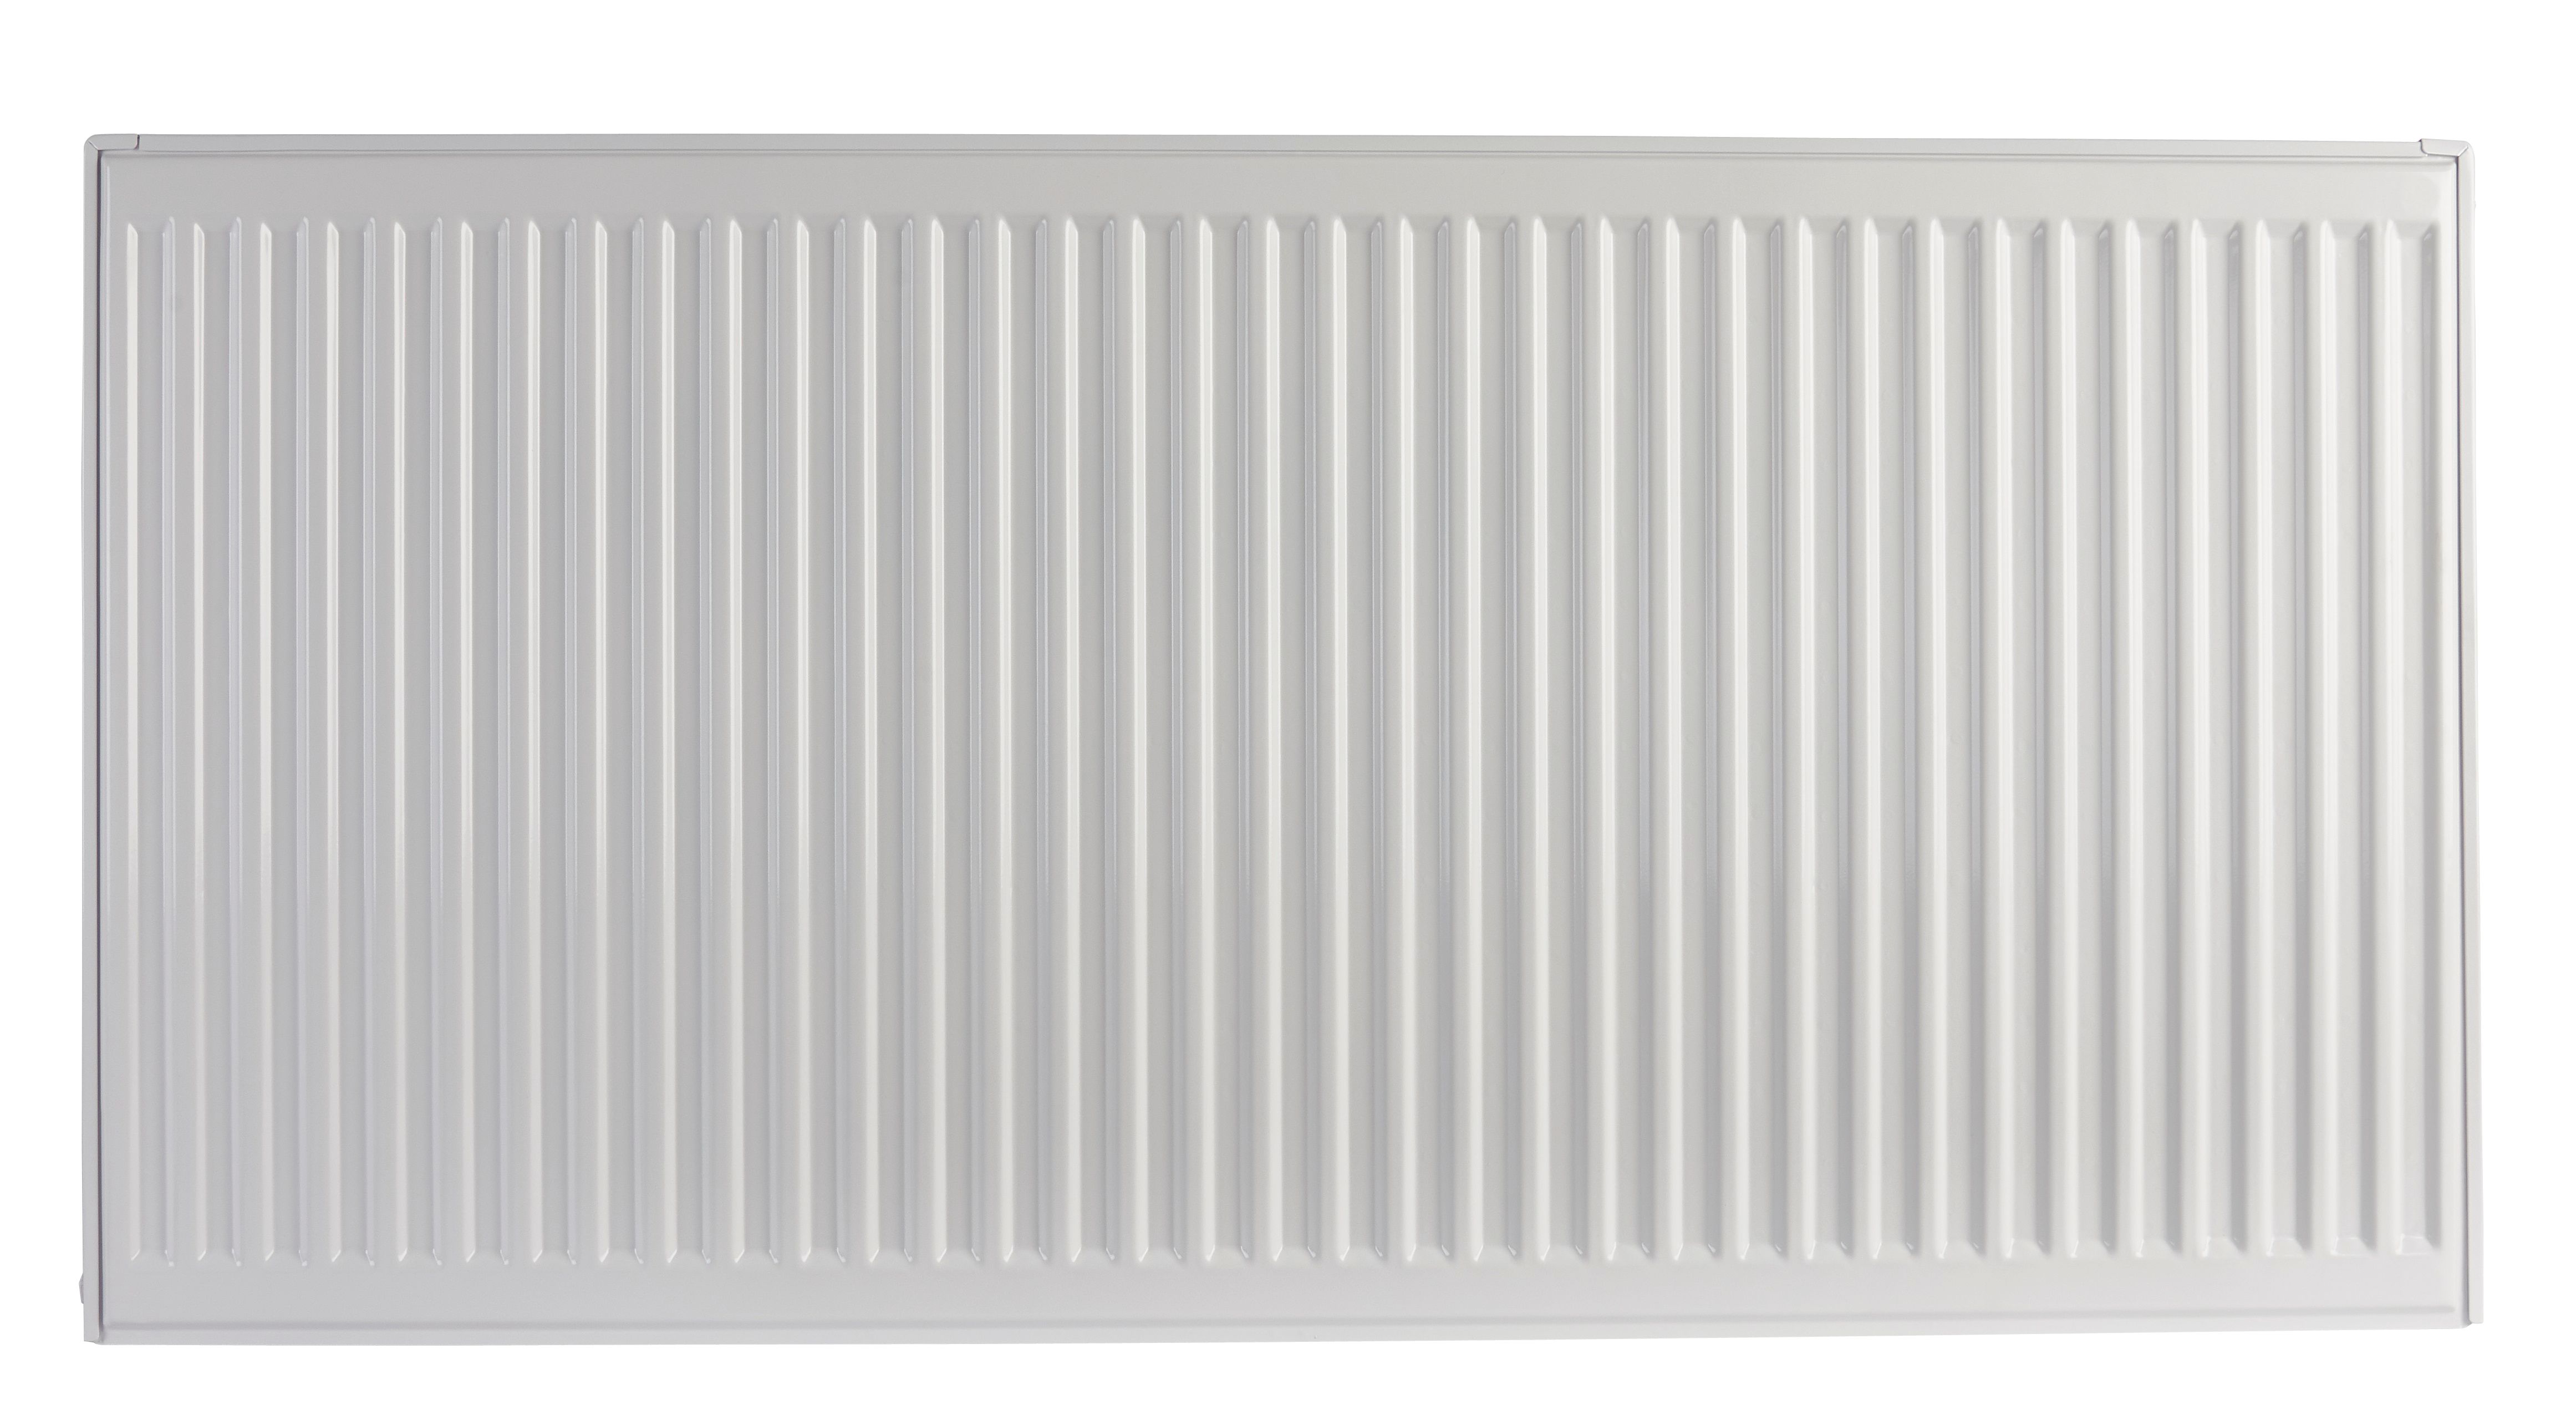 Image of Homeline by Stelrad 700 x 1200mm Type 22 Double Panel Premium Double Convector Radiator